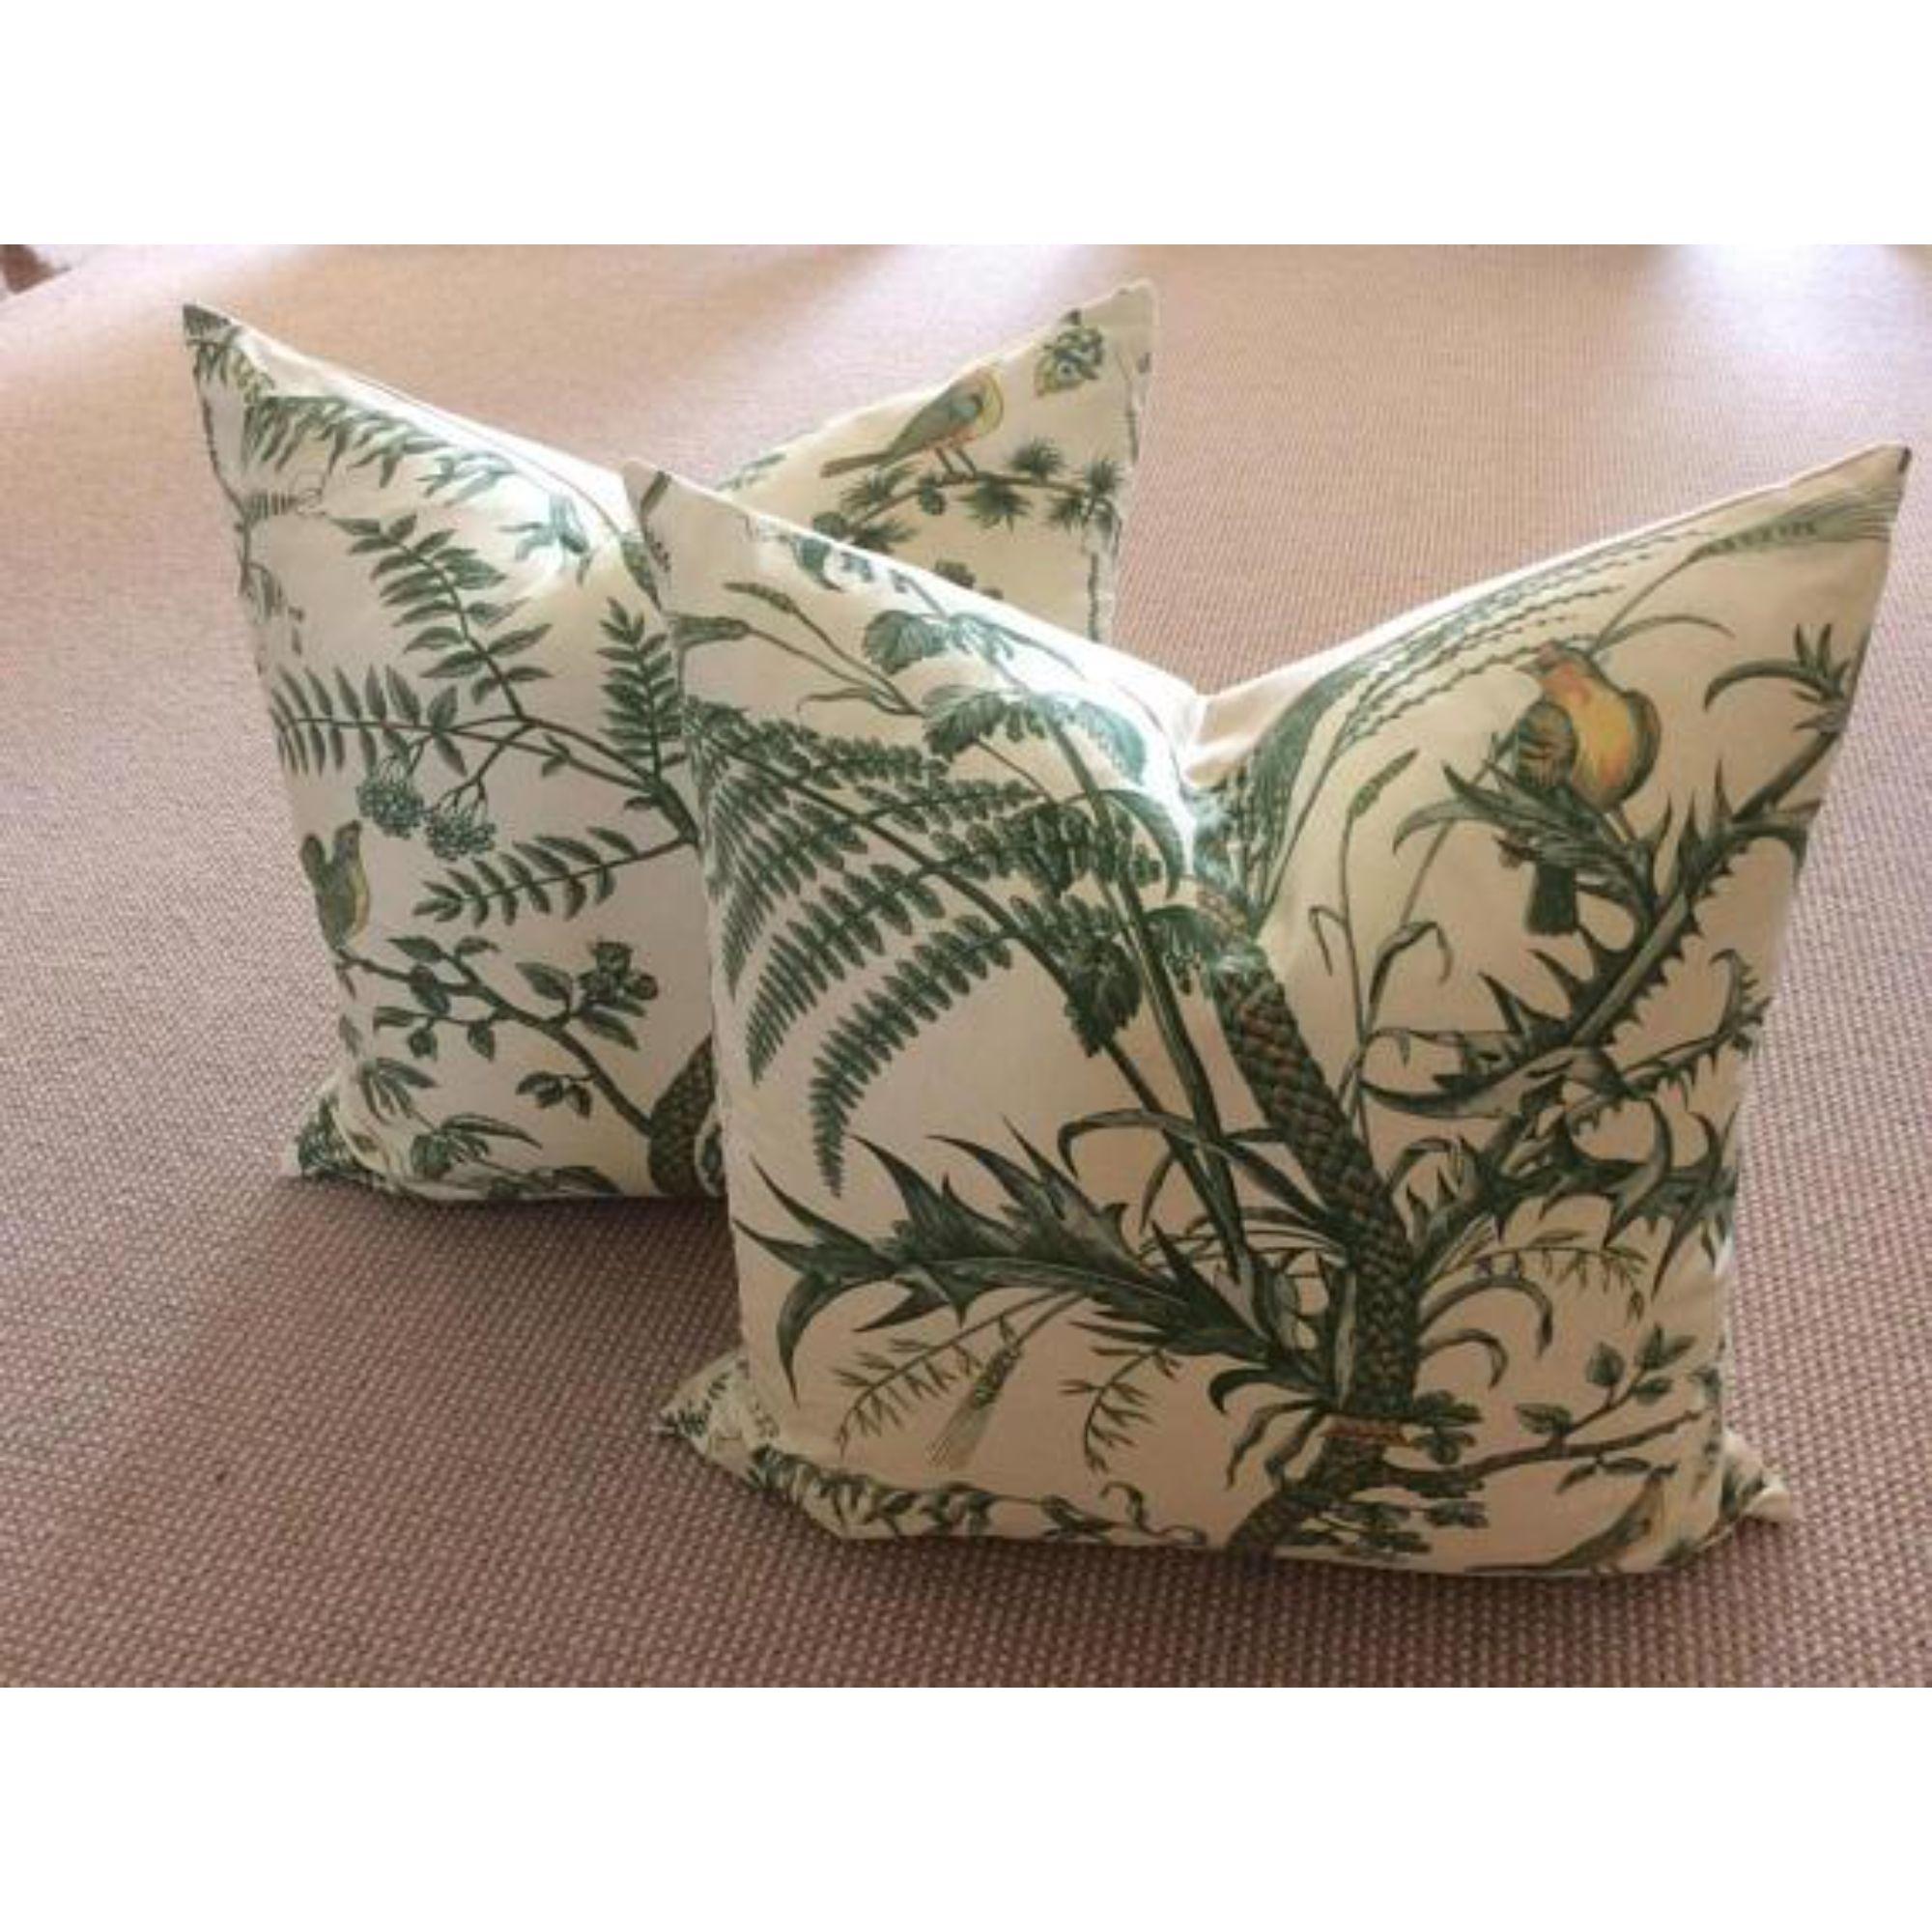 Brunschwig & Fils Bird and Thistle Green Pillow Covers - a Pair In New Condition For Sale In Winder, GA